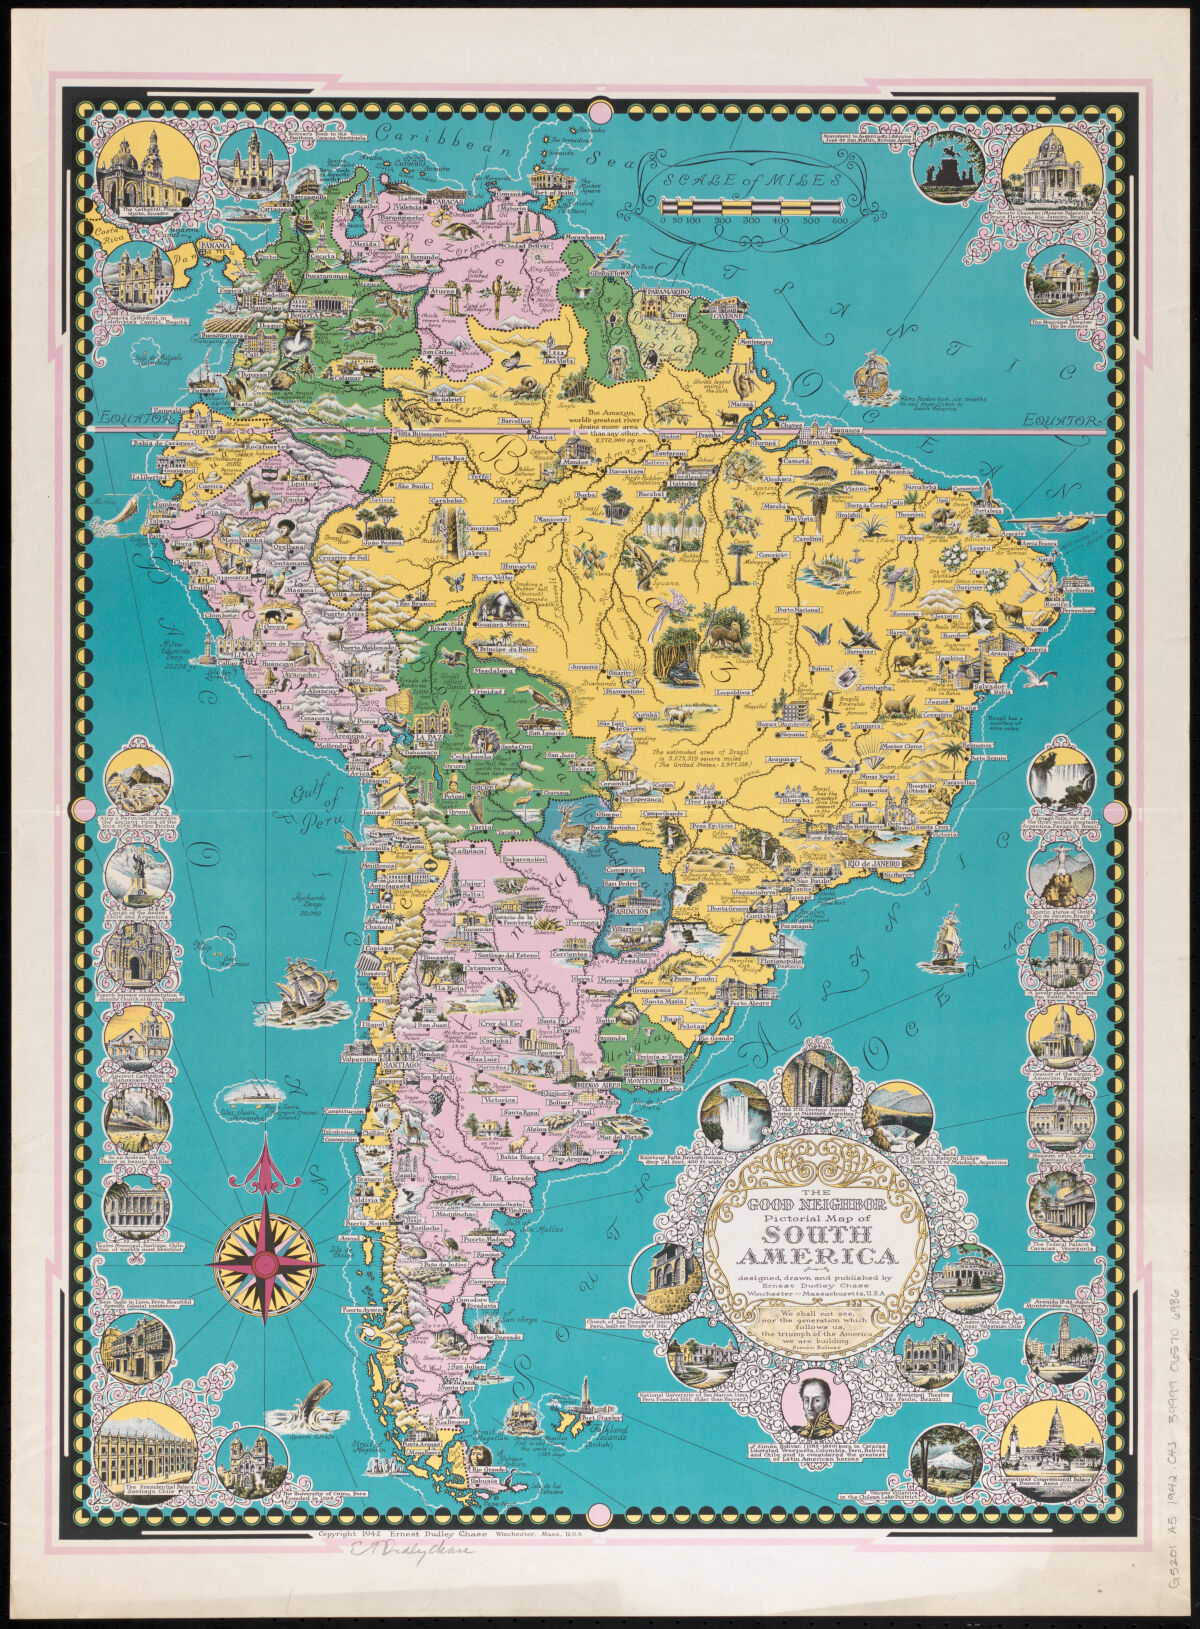 A mid-twentieth century pictorial map of South America by Ernest Dudley Chase.